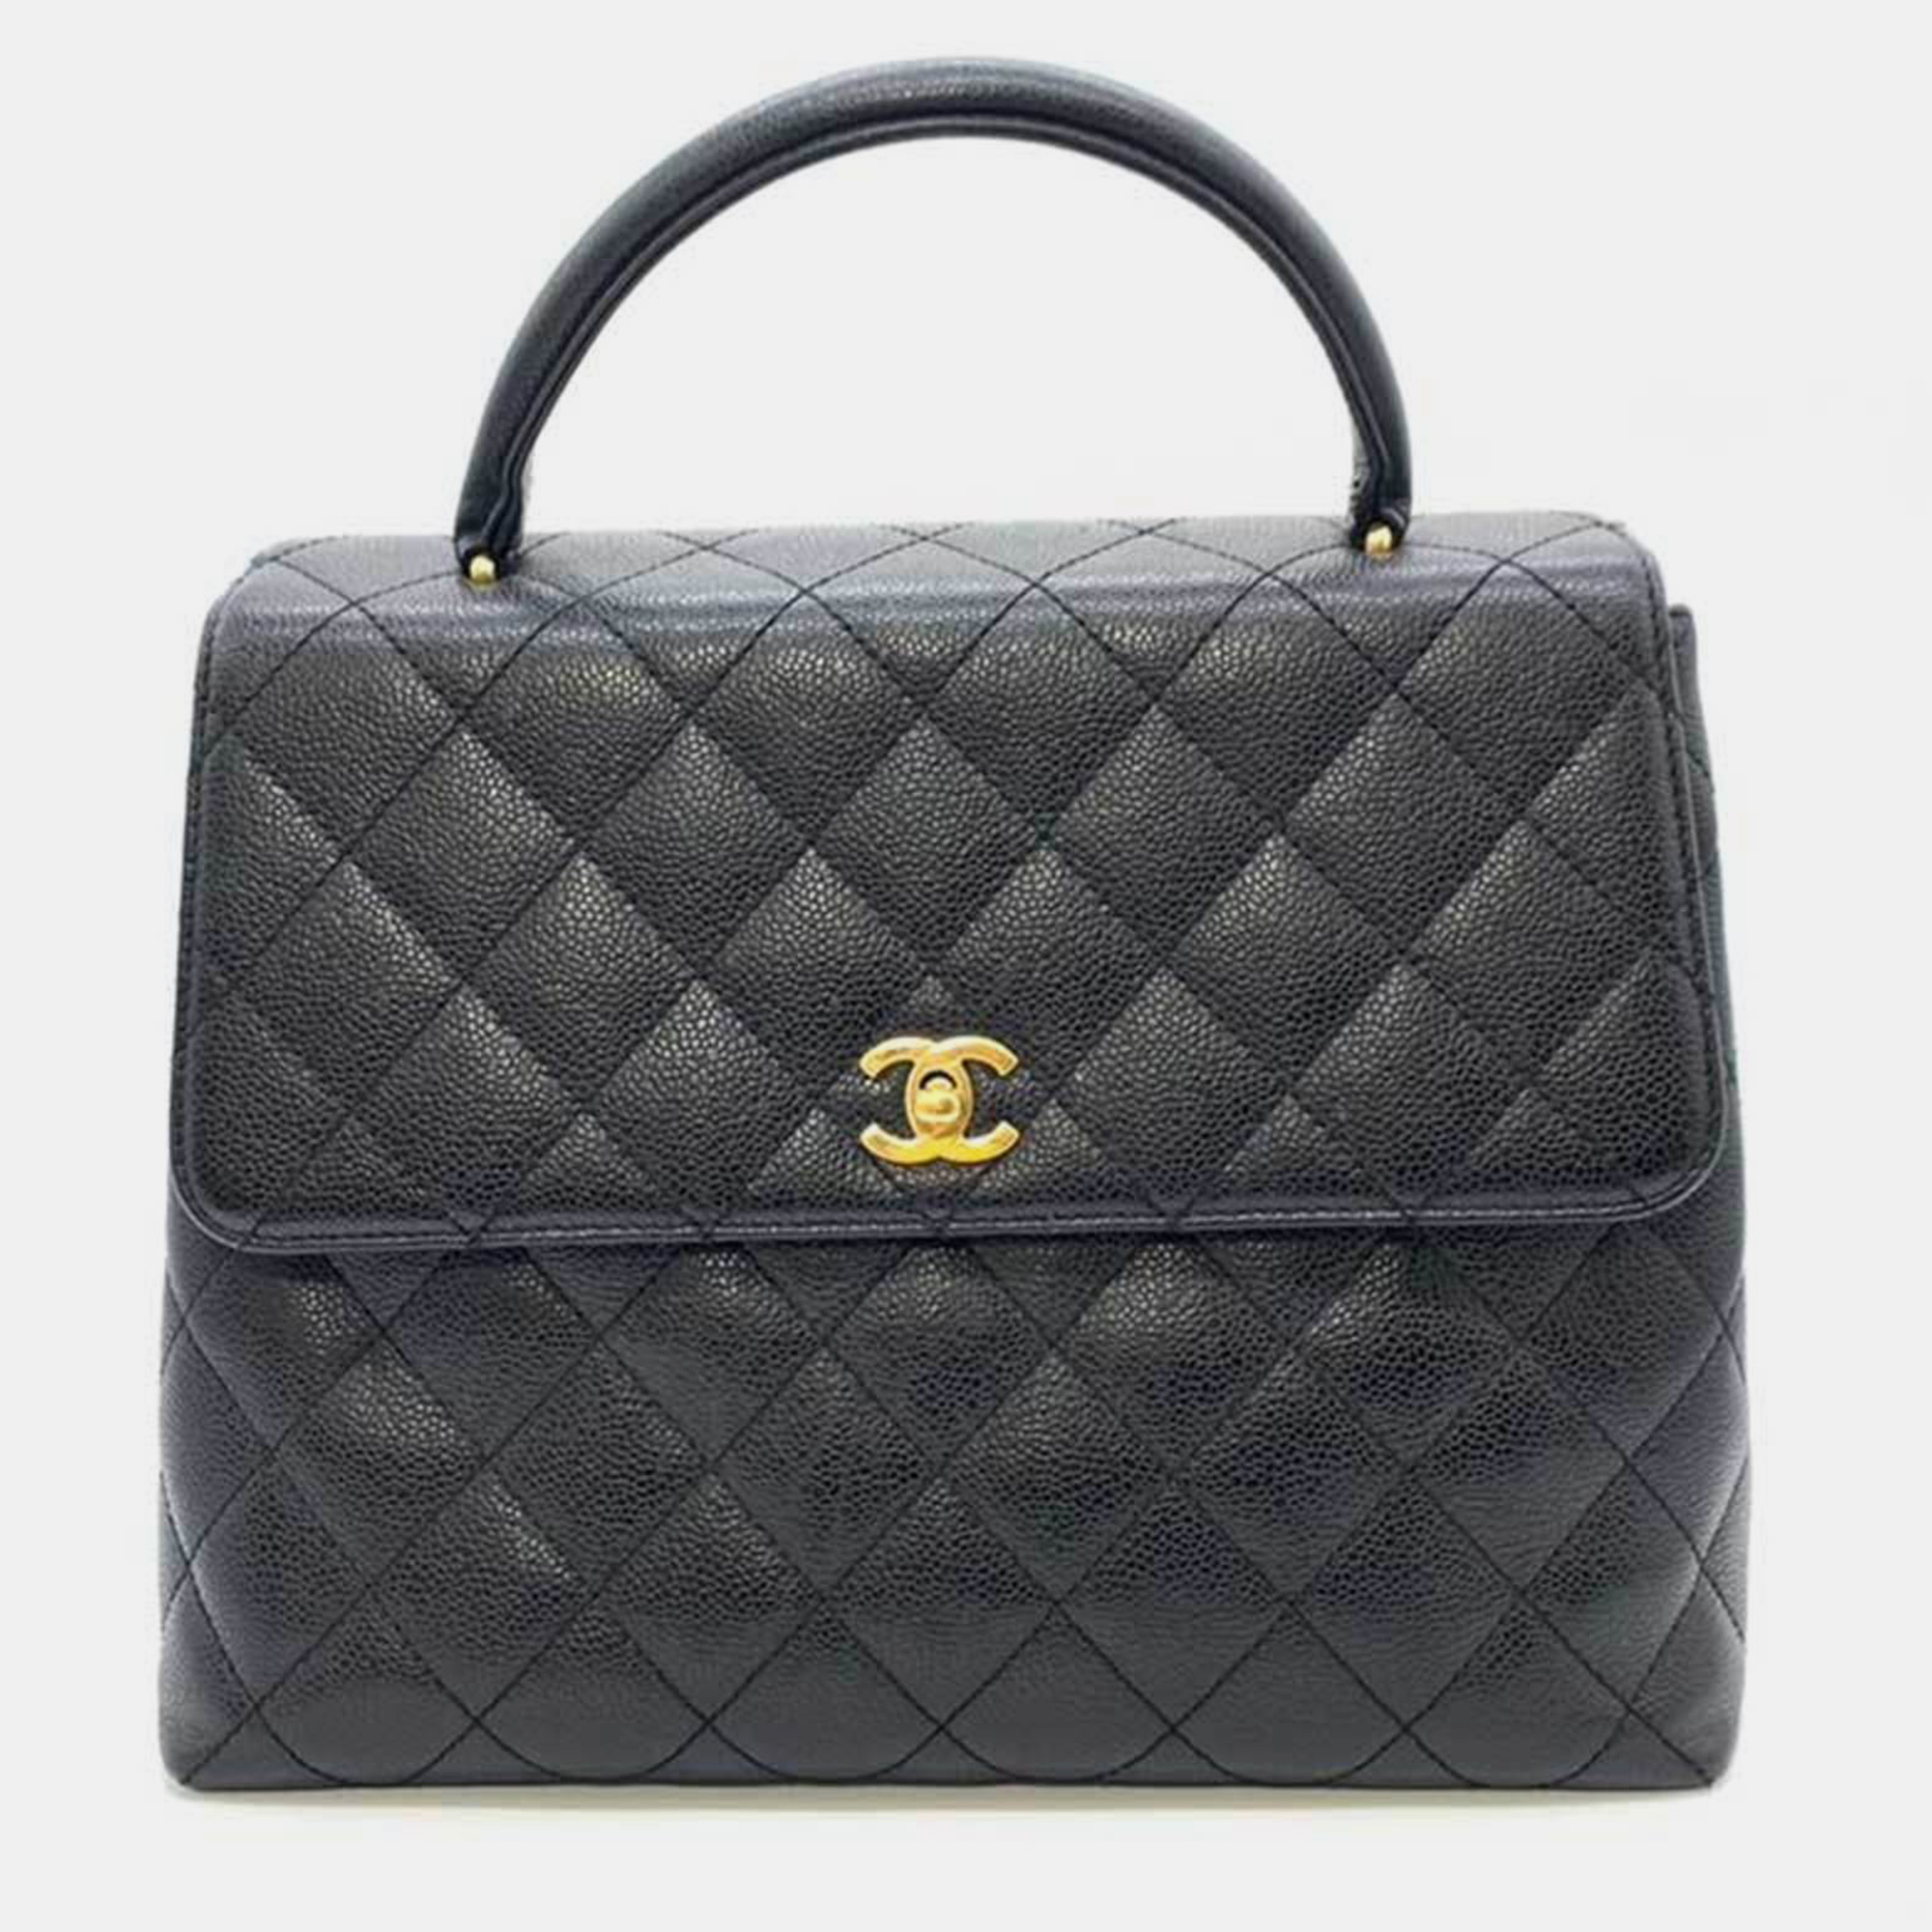 Chanel leather small kelly top handle bag